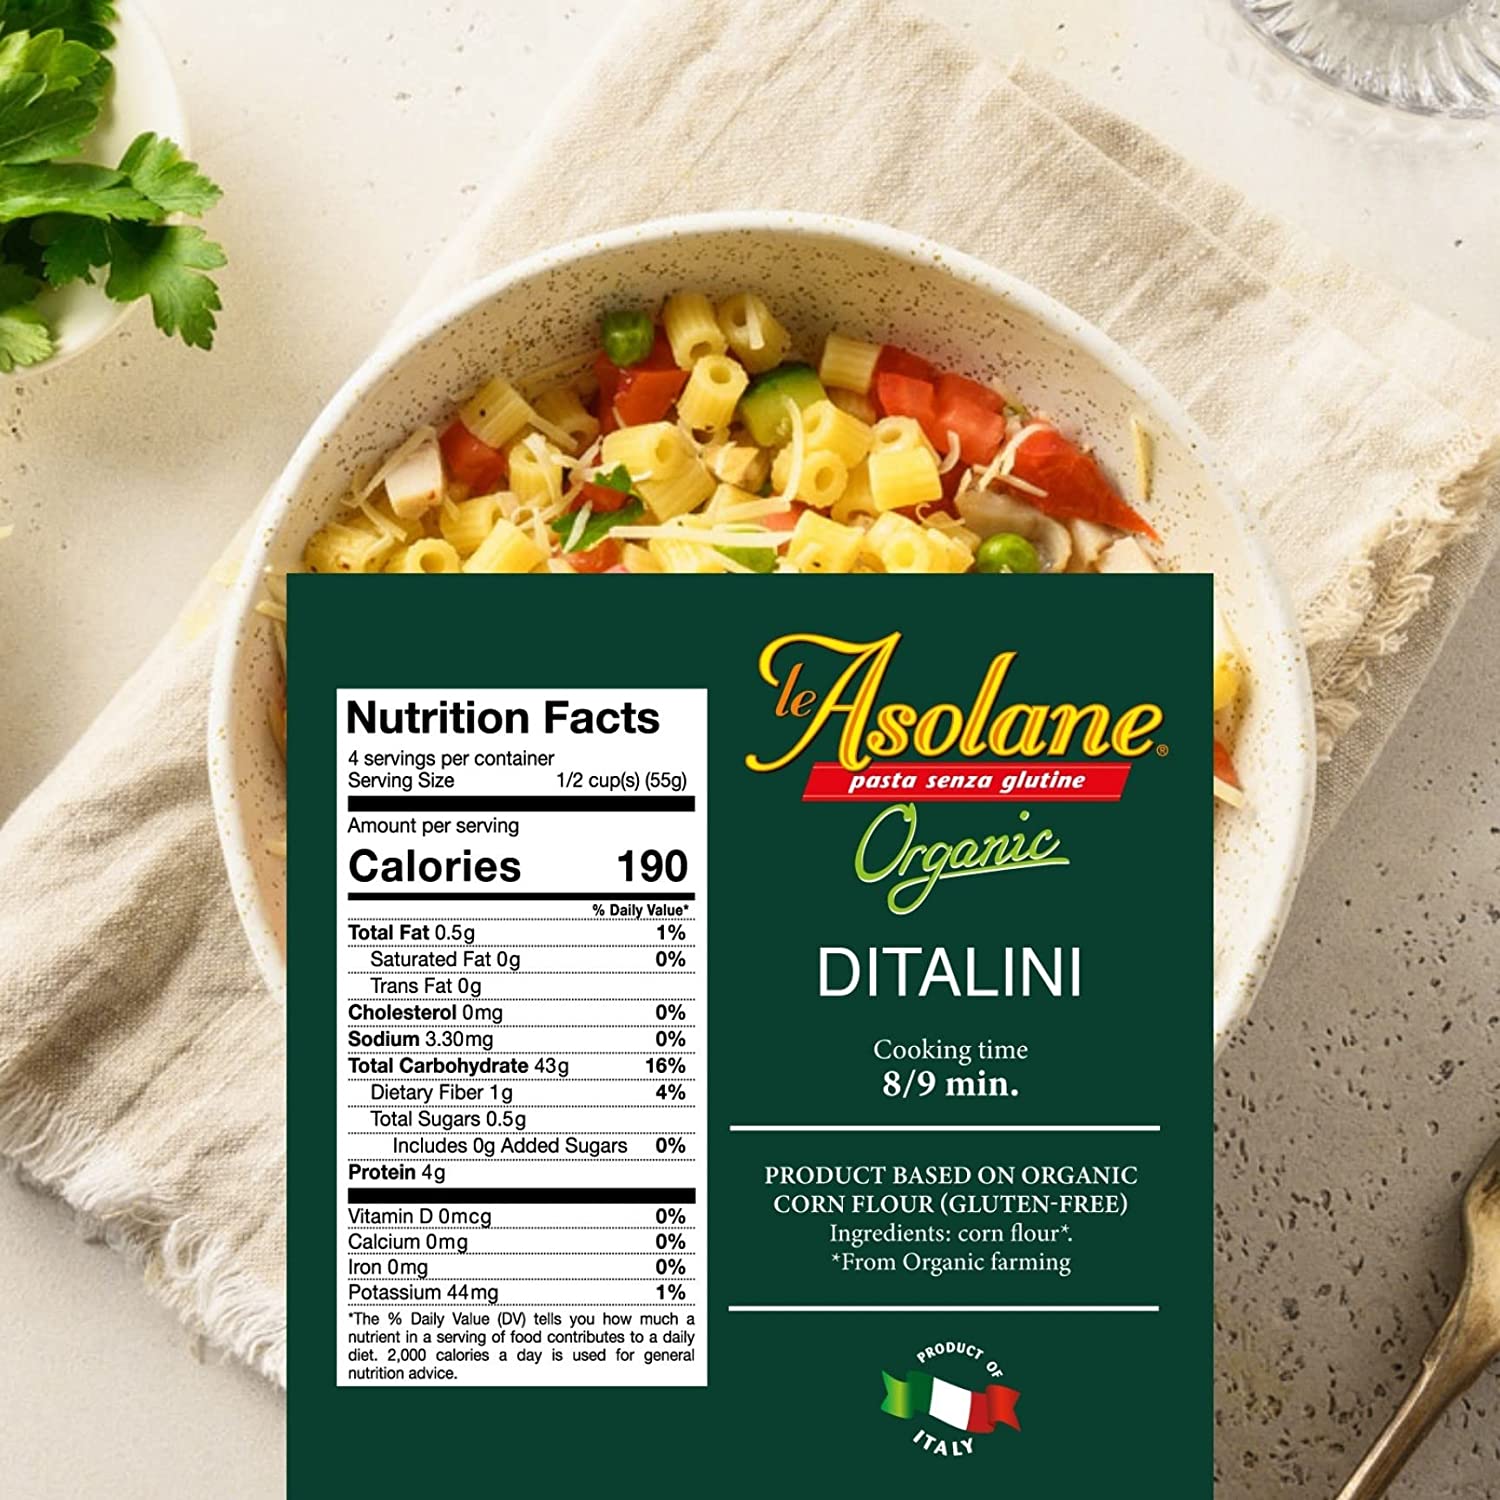 Le Asolane Certified Organic Gluten Free Ditalini Pasta | 2 Pack | Authentic Imported Italian Gourmet Pasta from Select Premium Grade Corn Flour | 8.8 oz packages